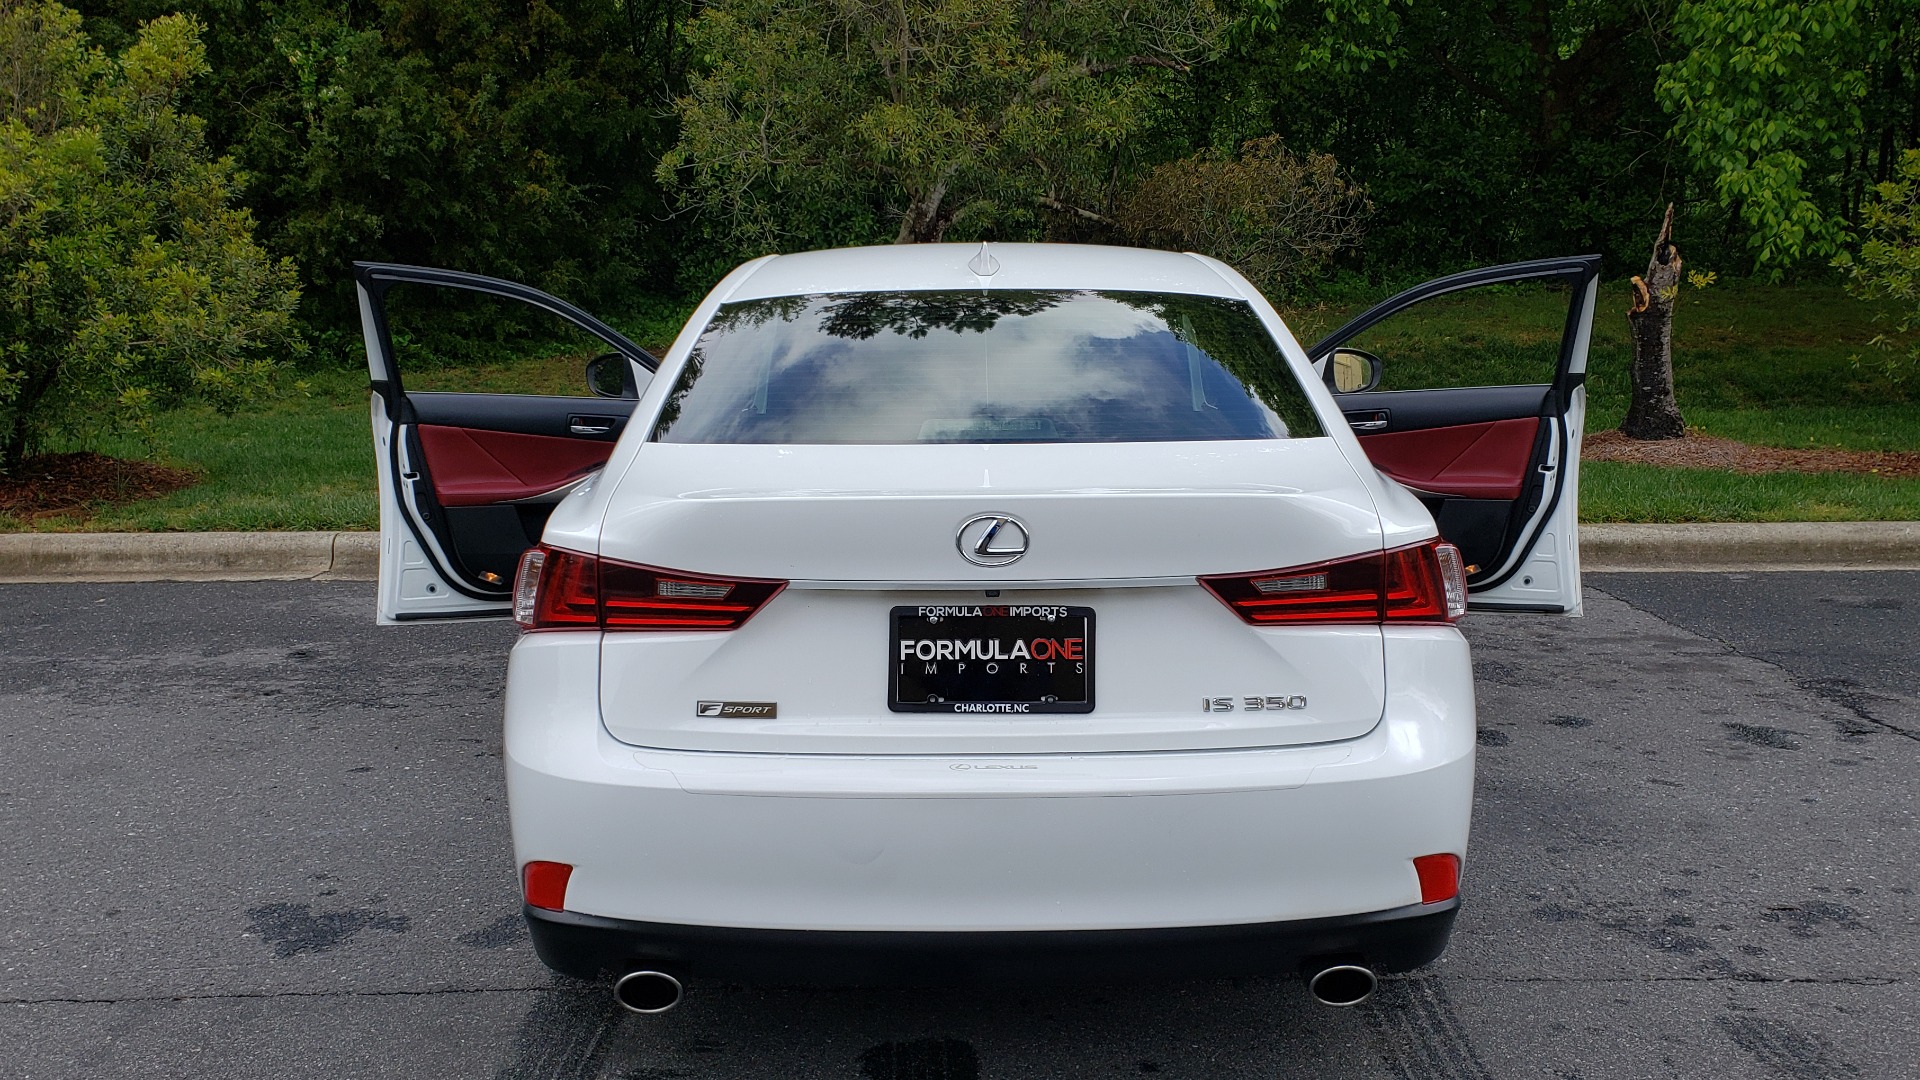 Used 2014 Lexus IS 350 F-SPORT / NAV / SUNROOF / REARVIEW / BSM / MARK LEV SND for sale Sold at Formula Imports in Charlotte NC 28227 25